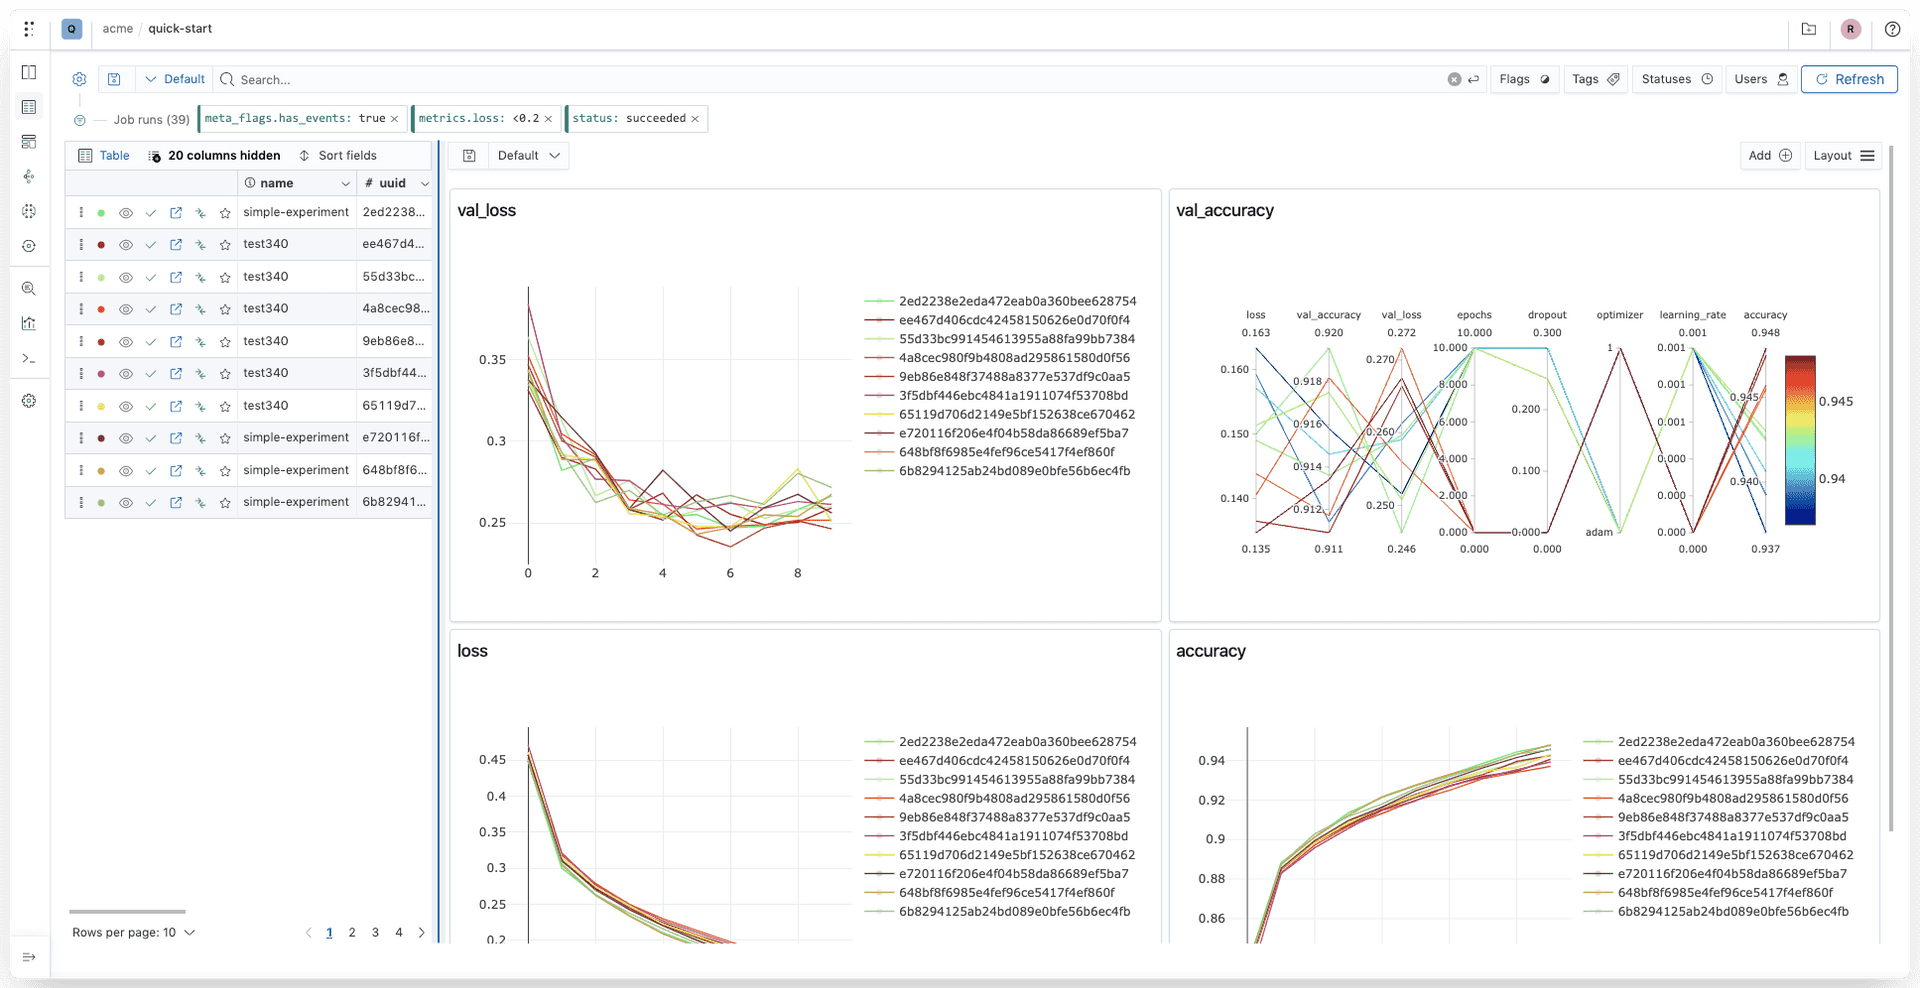 Polyaxon v1.3: New search and visualization interface